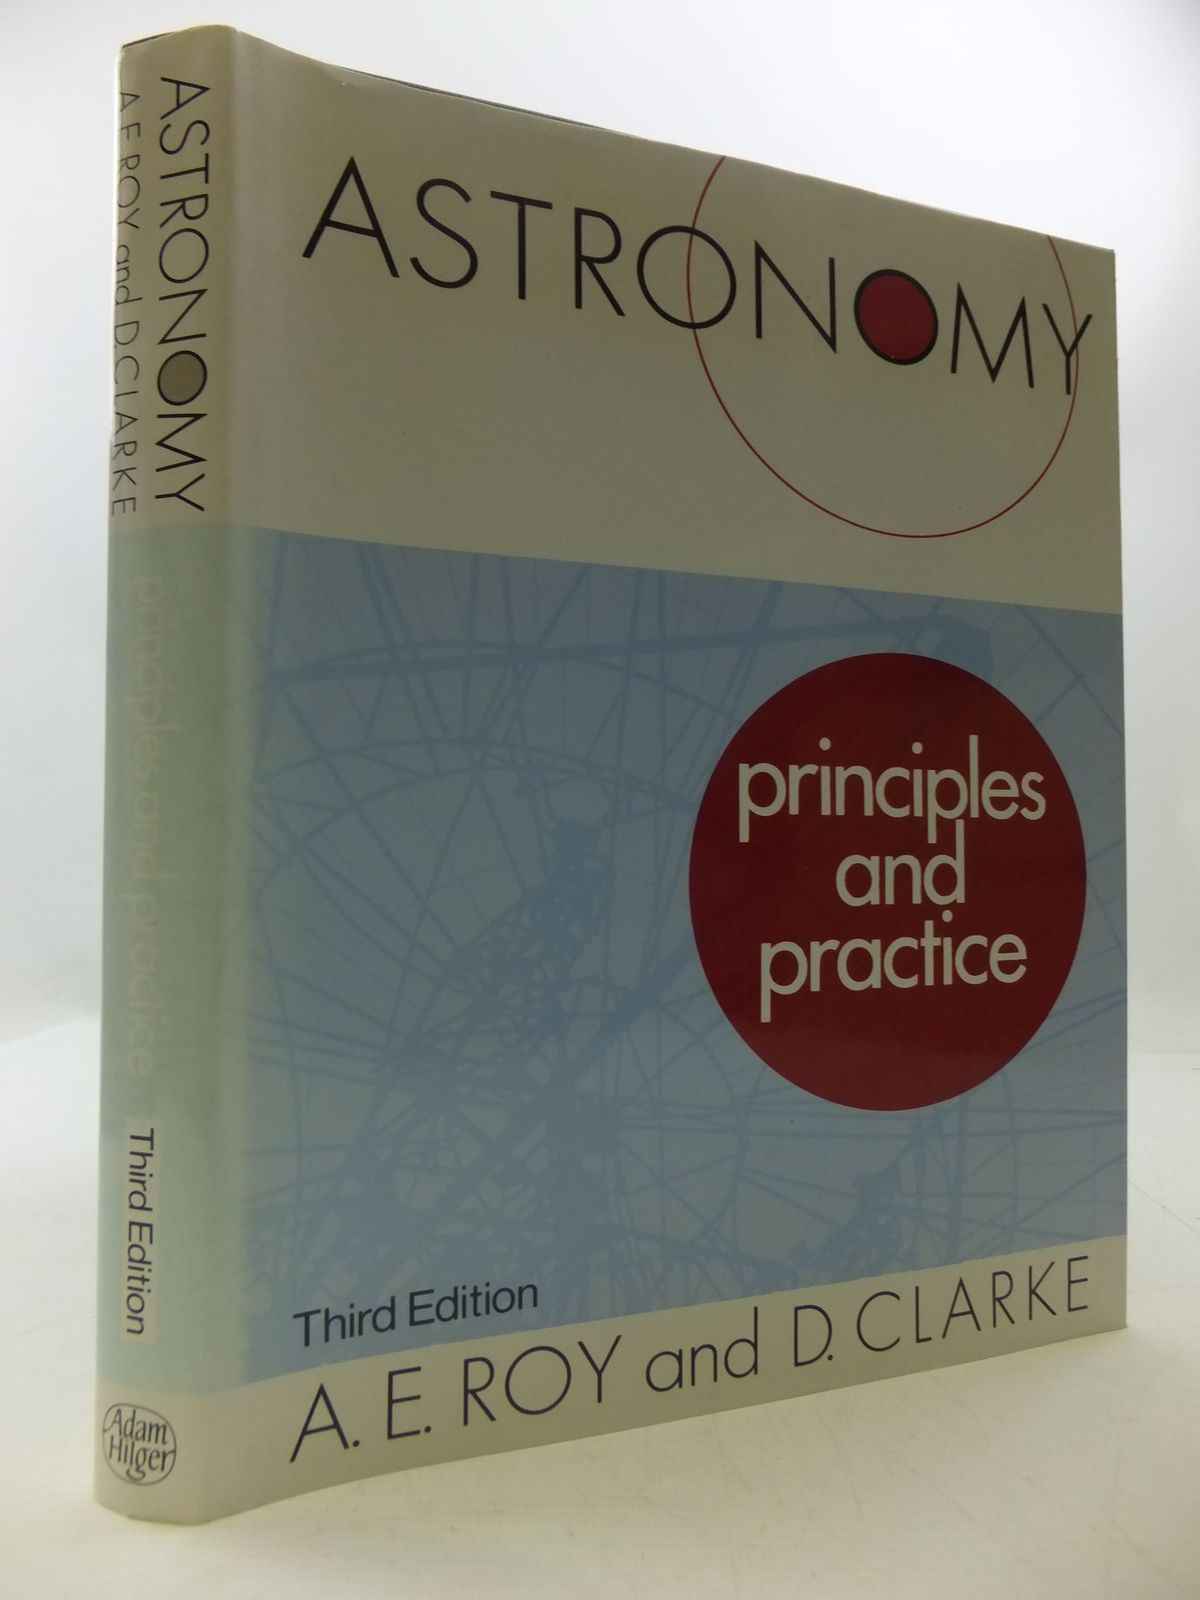 Photo of ASTRONOMY: PRINCIPLES AND PRACTICE written by Roy, A.E.
Clarke, D. published by Adam Hilger Ltd. (STOCK CODE: 1709324)  for sale by Stella & Rose's Books